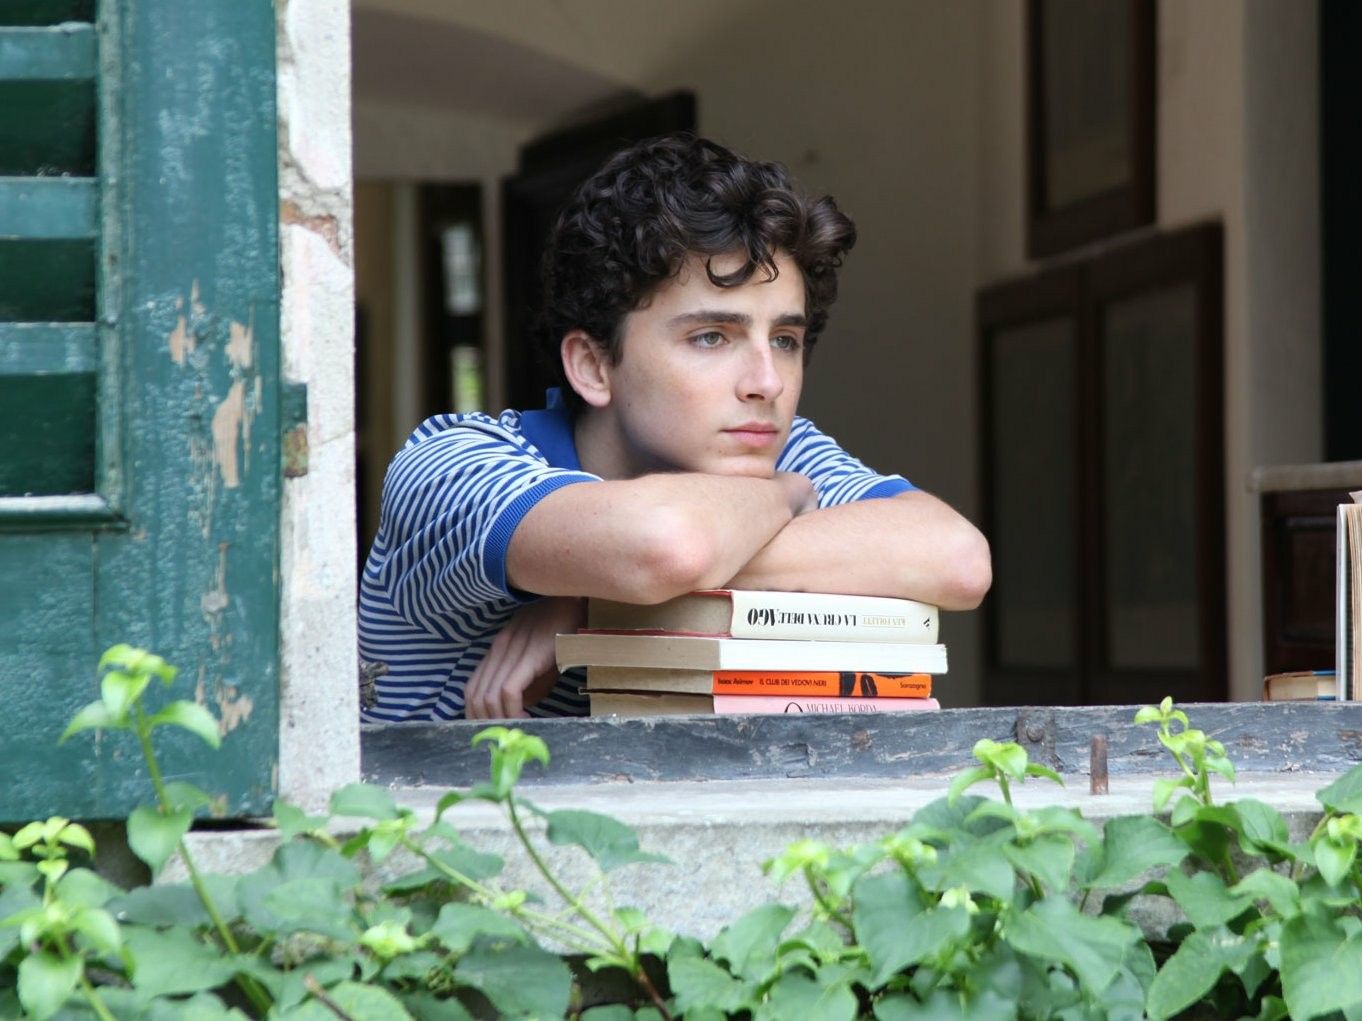 Introvert Or Extrovert Word Quiz Call Me by Your Name Timothée Chalamet thinking